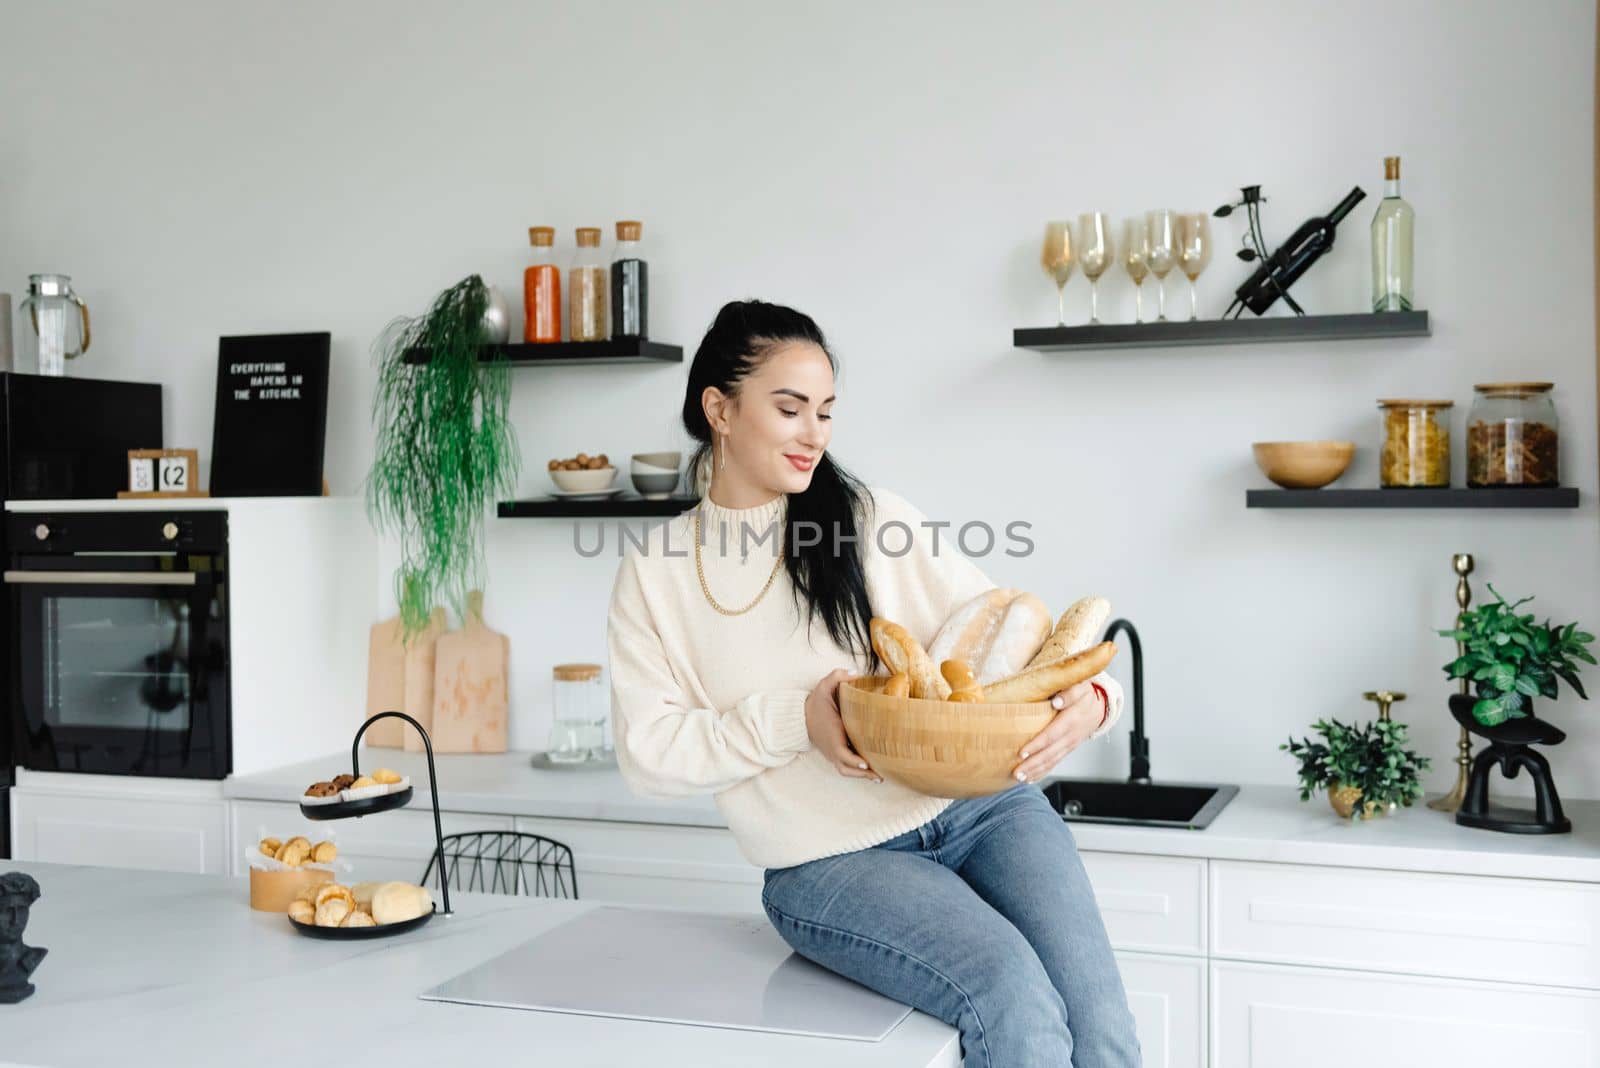 A woman sits in her kitchen holding a bread basket. Enjoying the little things. Lykke Concepts. Relaxation Concepts.